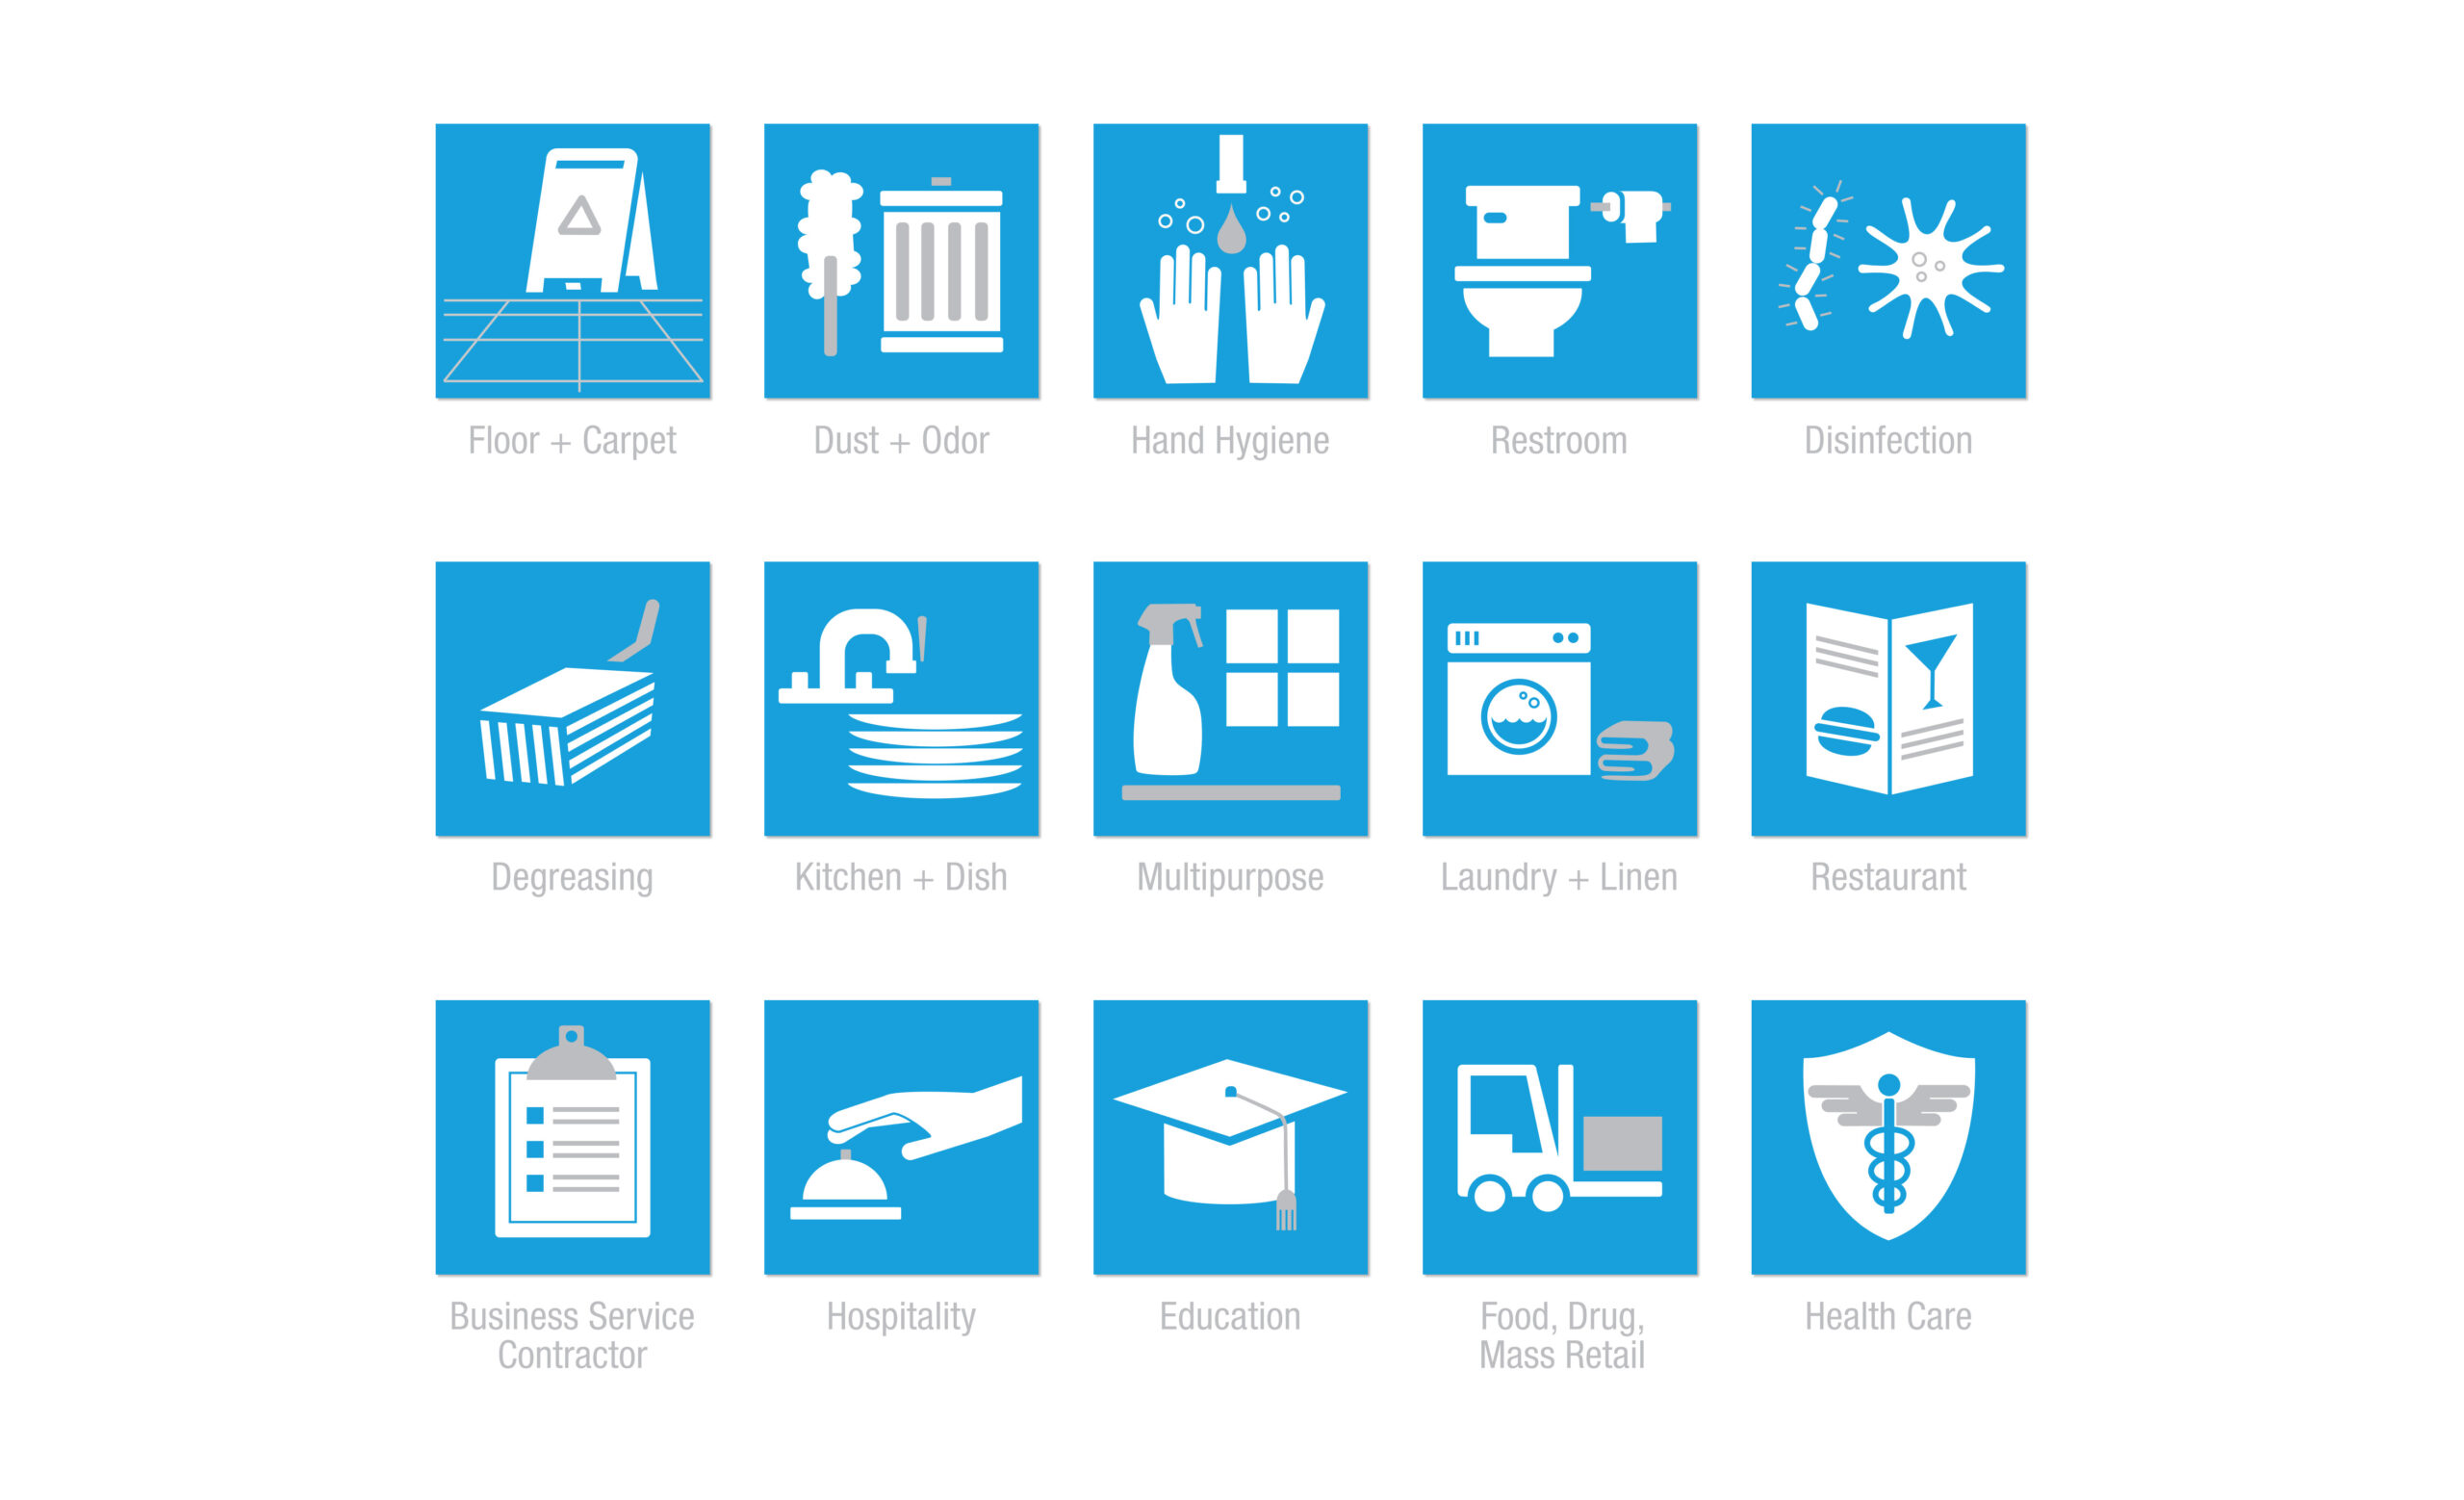 Procter and Gamble pictograms